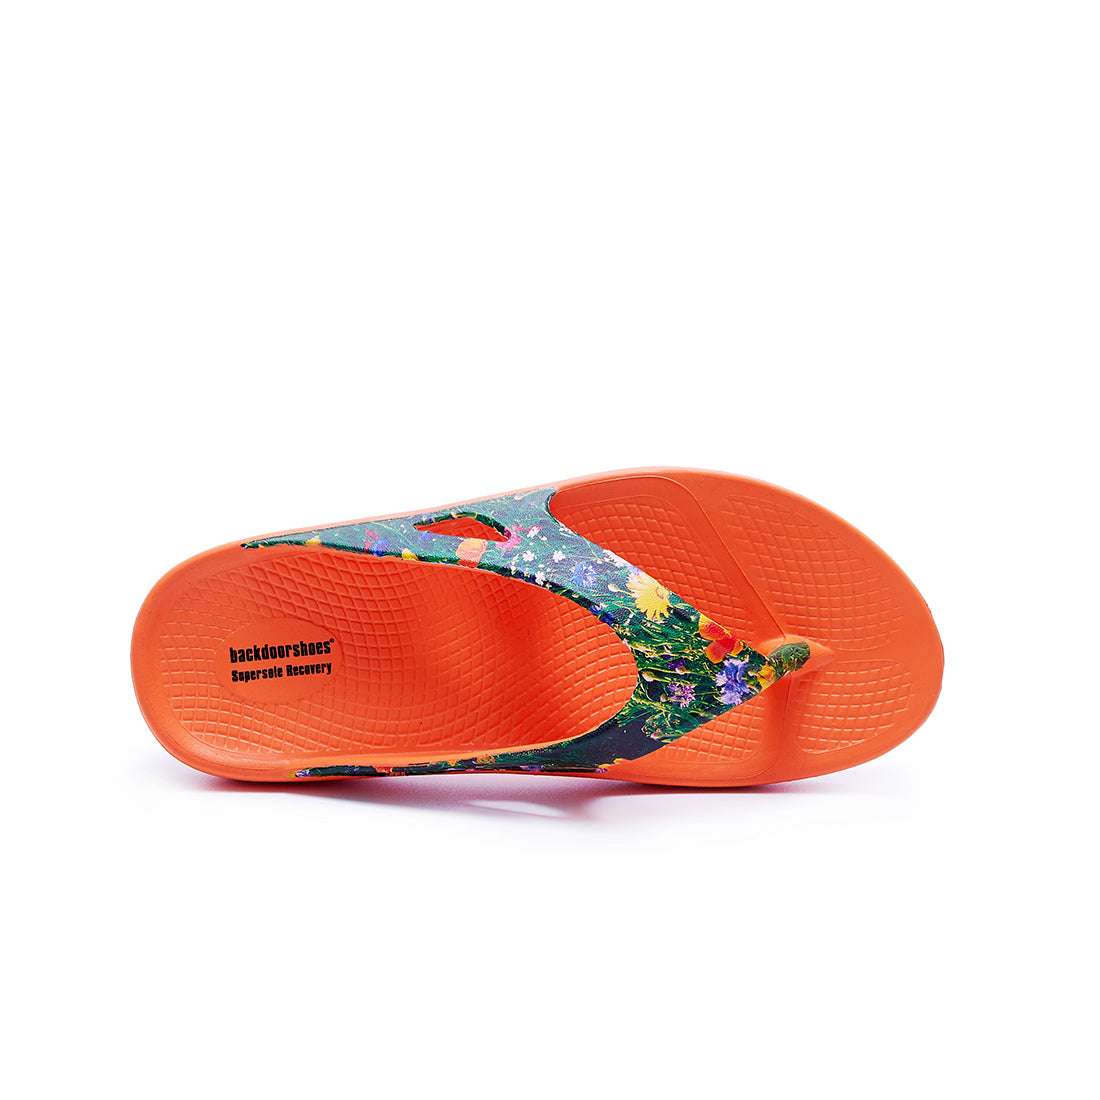 Meadow printed orange supersole comfortable recovery flip flops